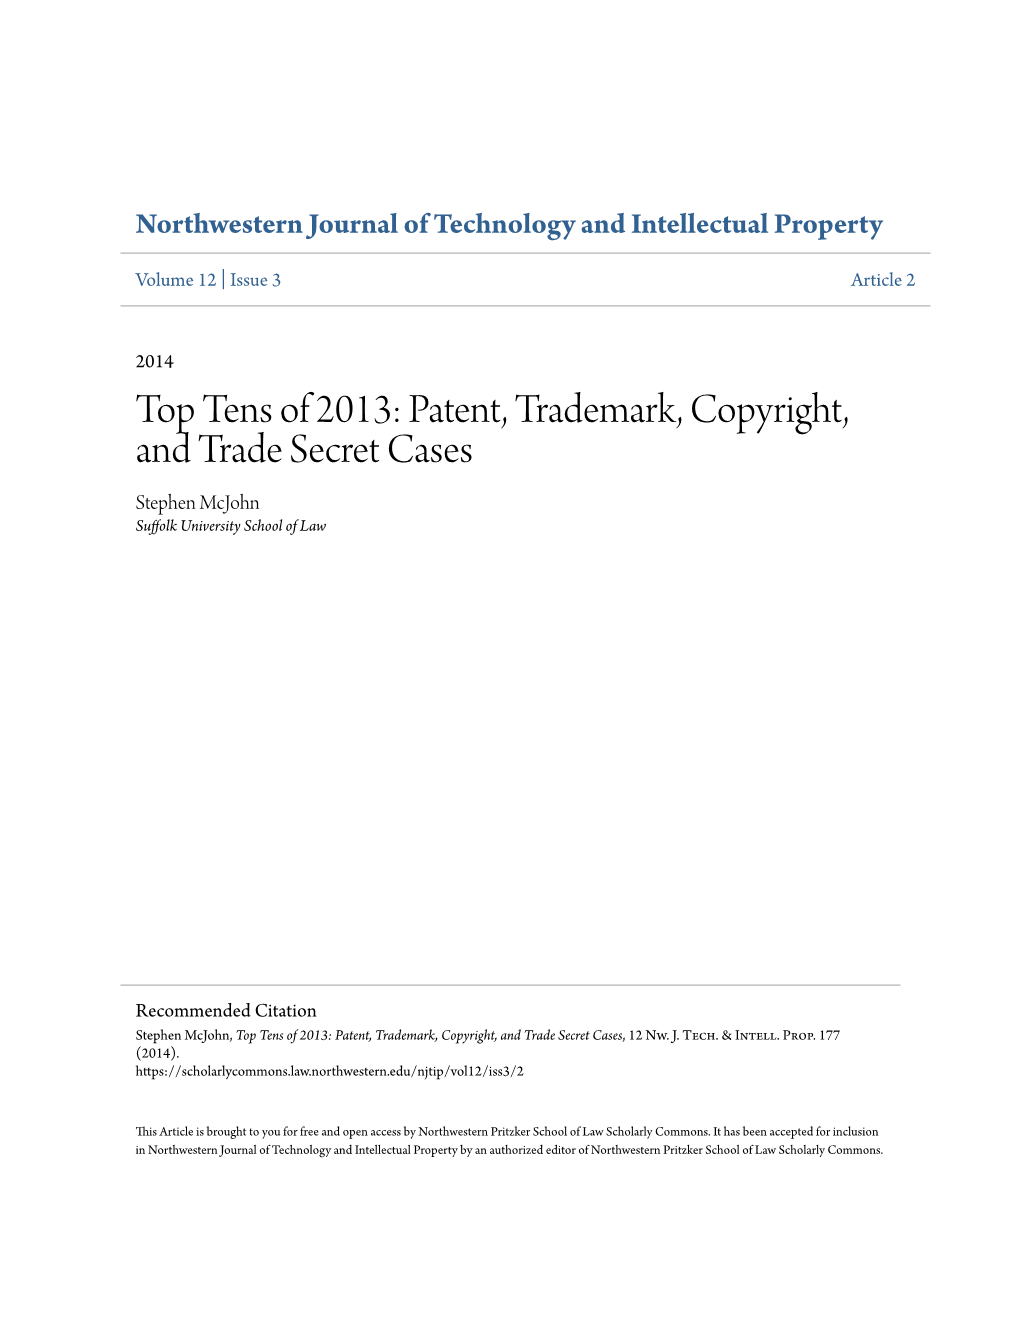 Top Tens of 2013: Patent, Trademark, Copyright, and Trade Secret Cases Stephen Mcjohn Suffolk University School of Law